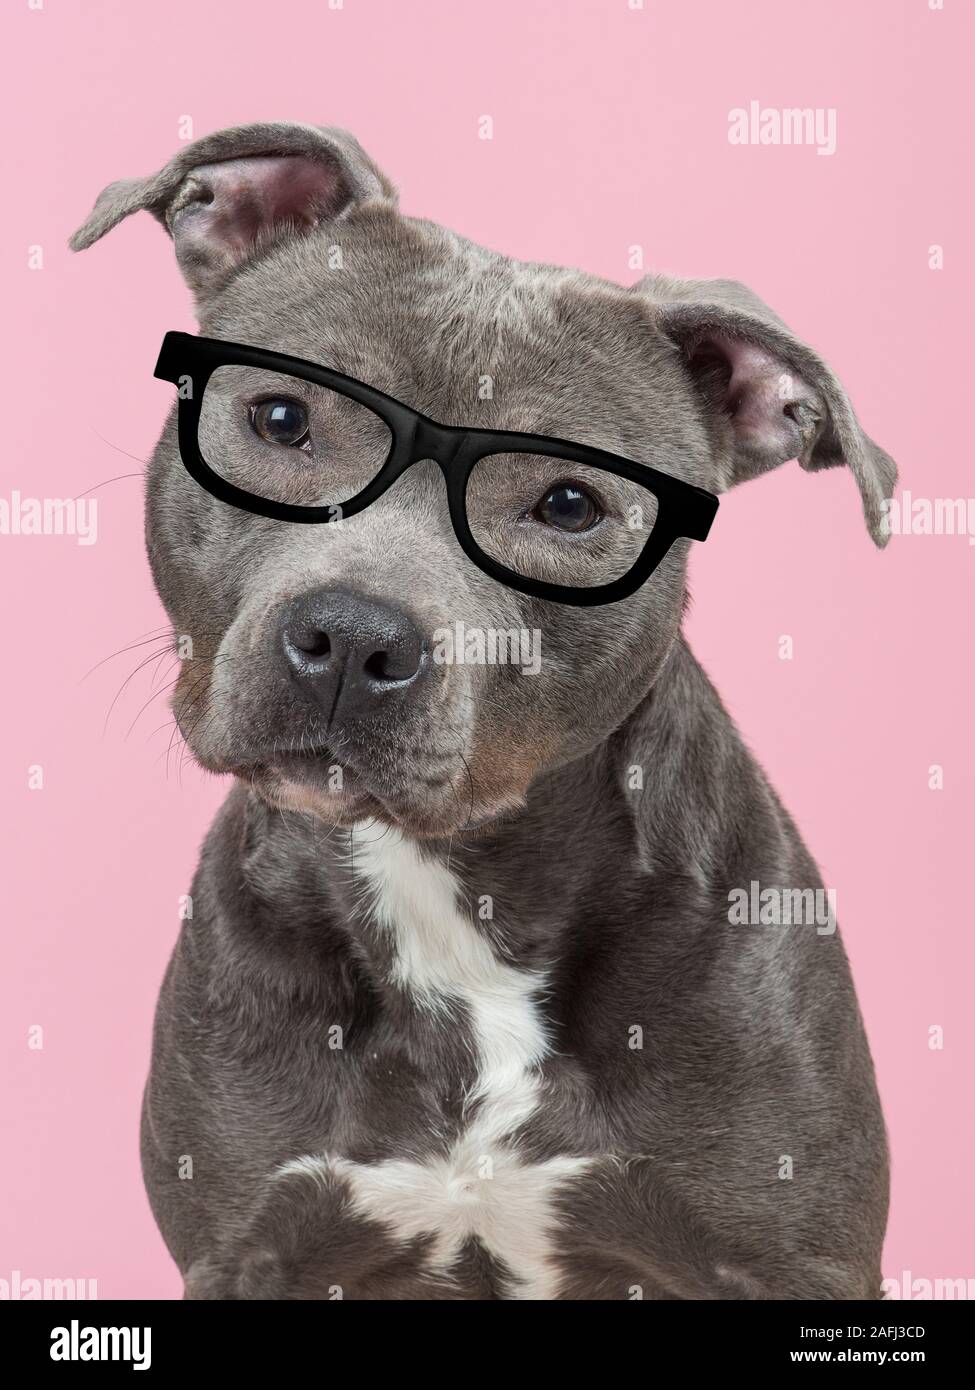 Portrait of a Pit-bull terrier dog at a pink background wearing black glasses  in a vertical image Stock Photo - Alamy